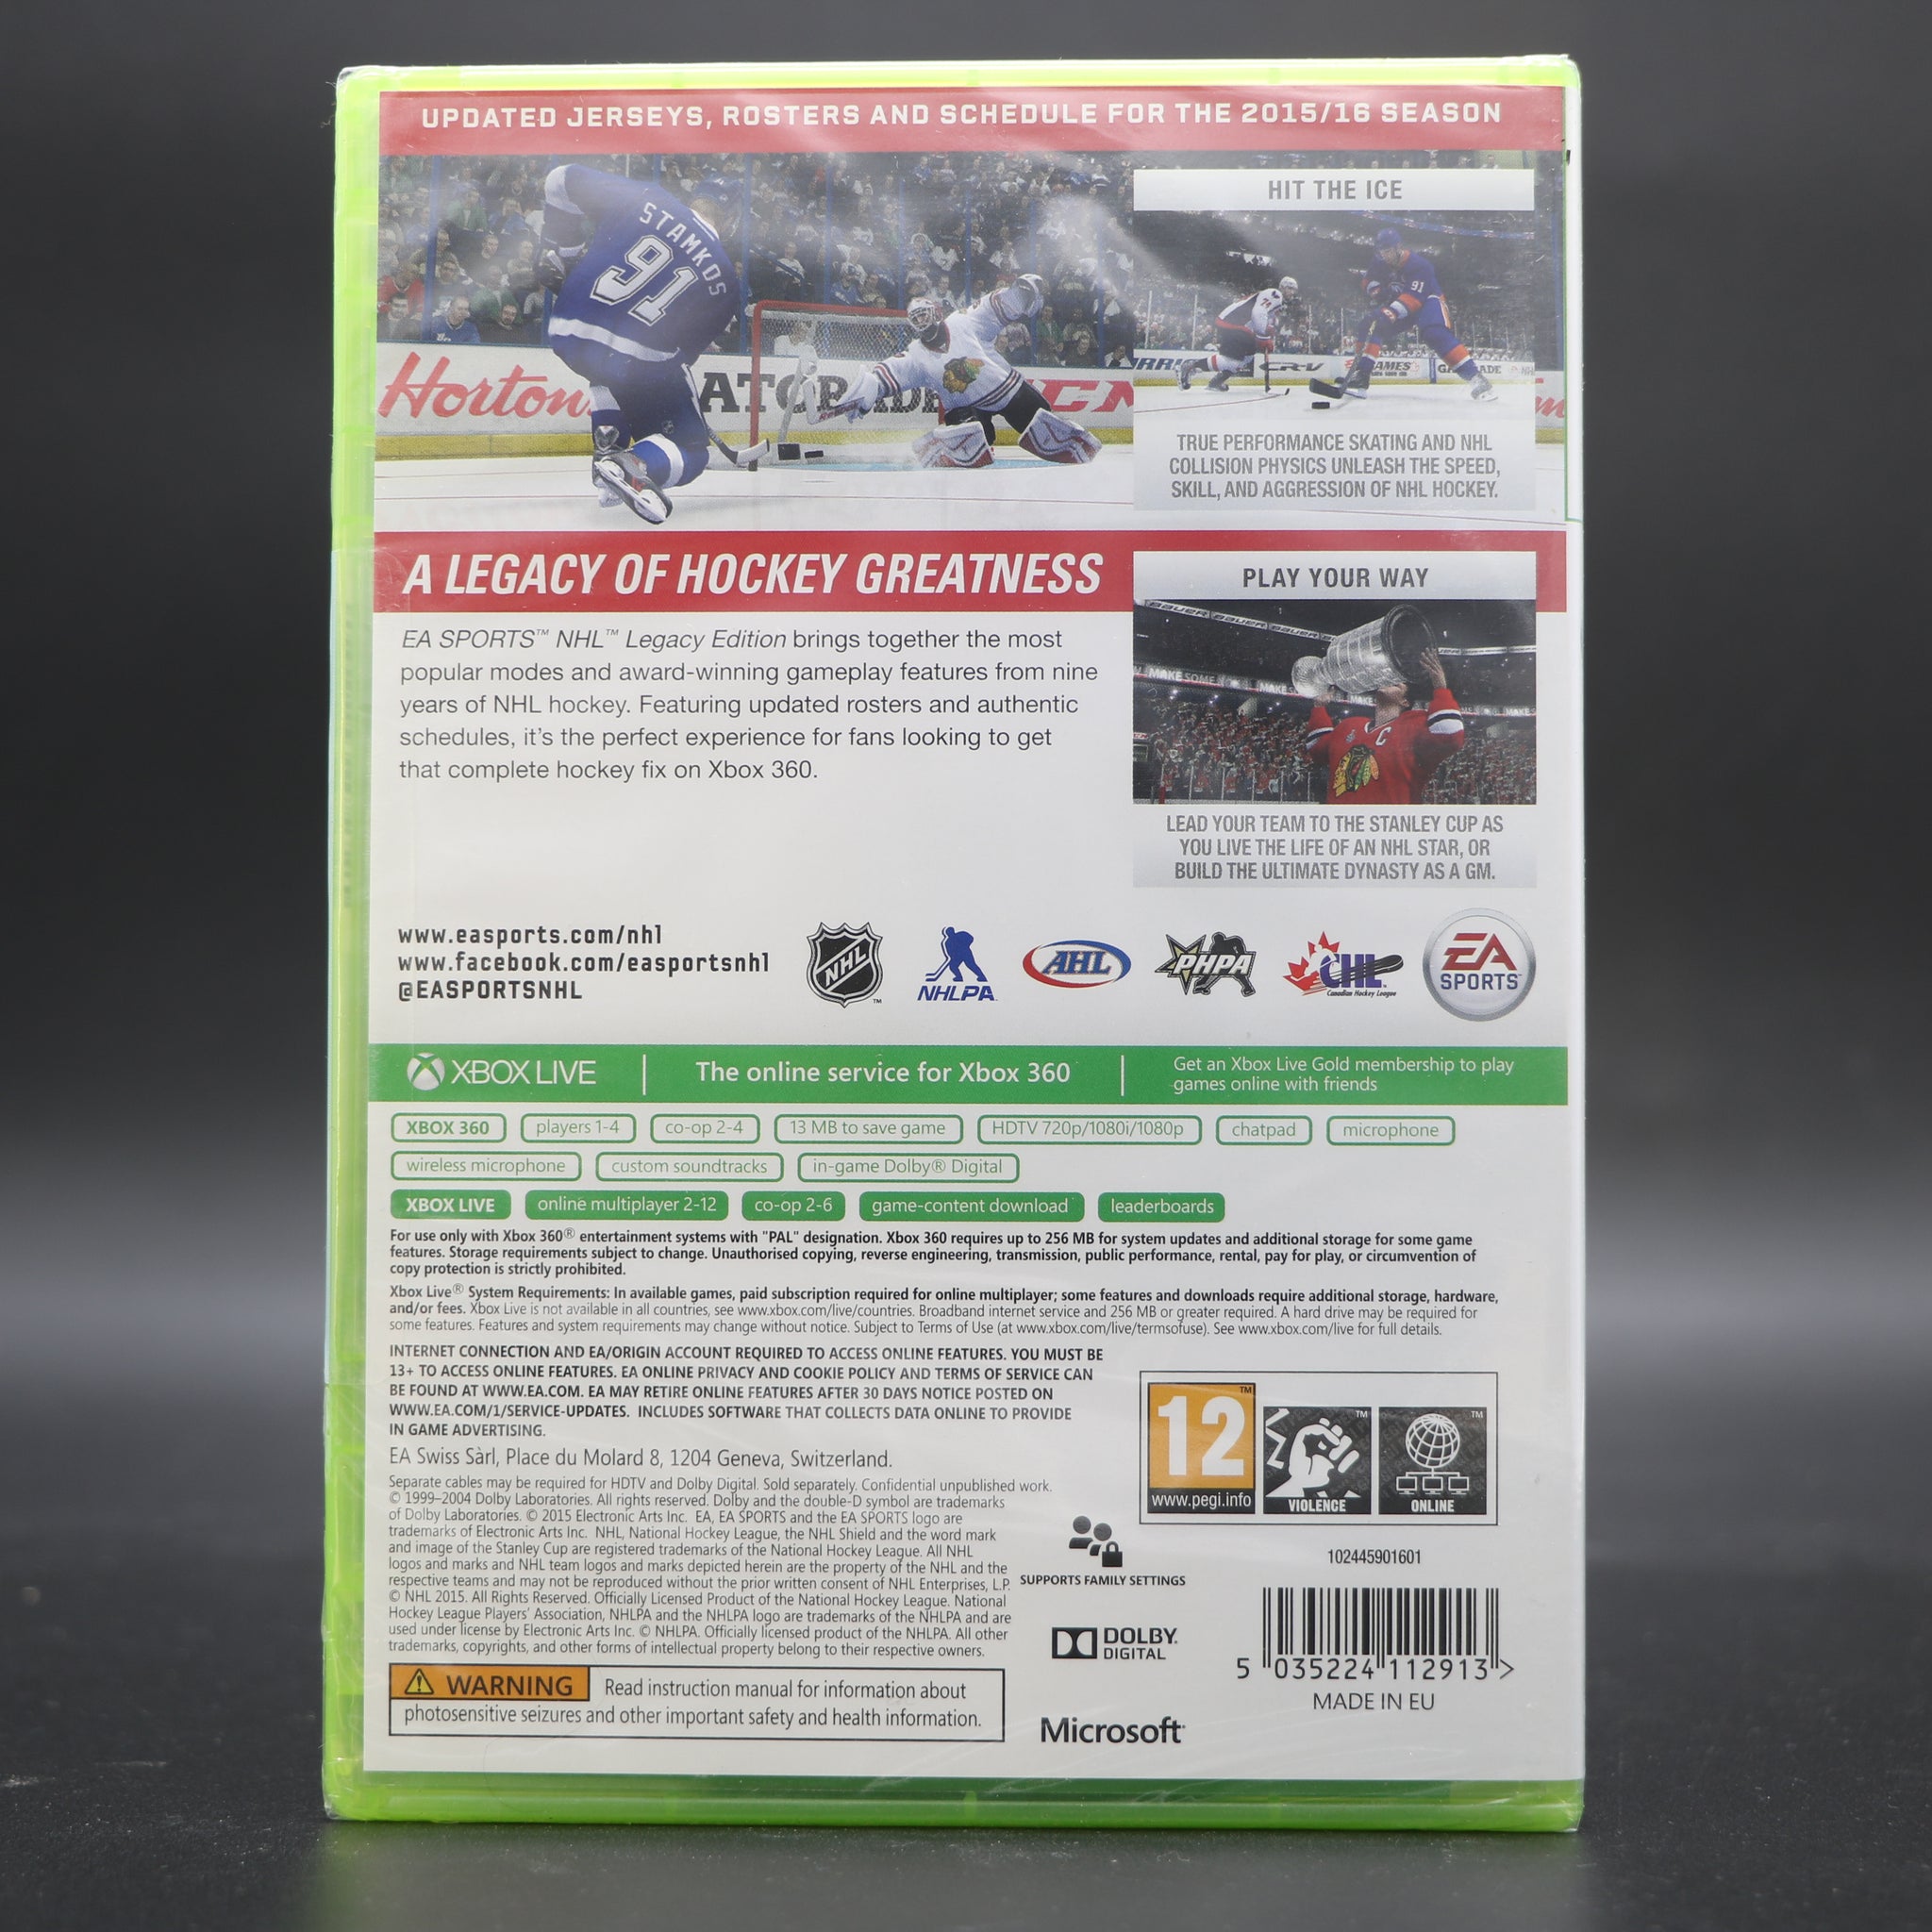 Fifa 12 | Special Edition | Microsoft Xbox 360 Game | New & Sealed